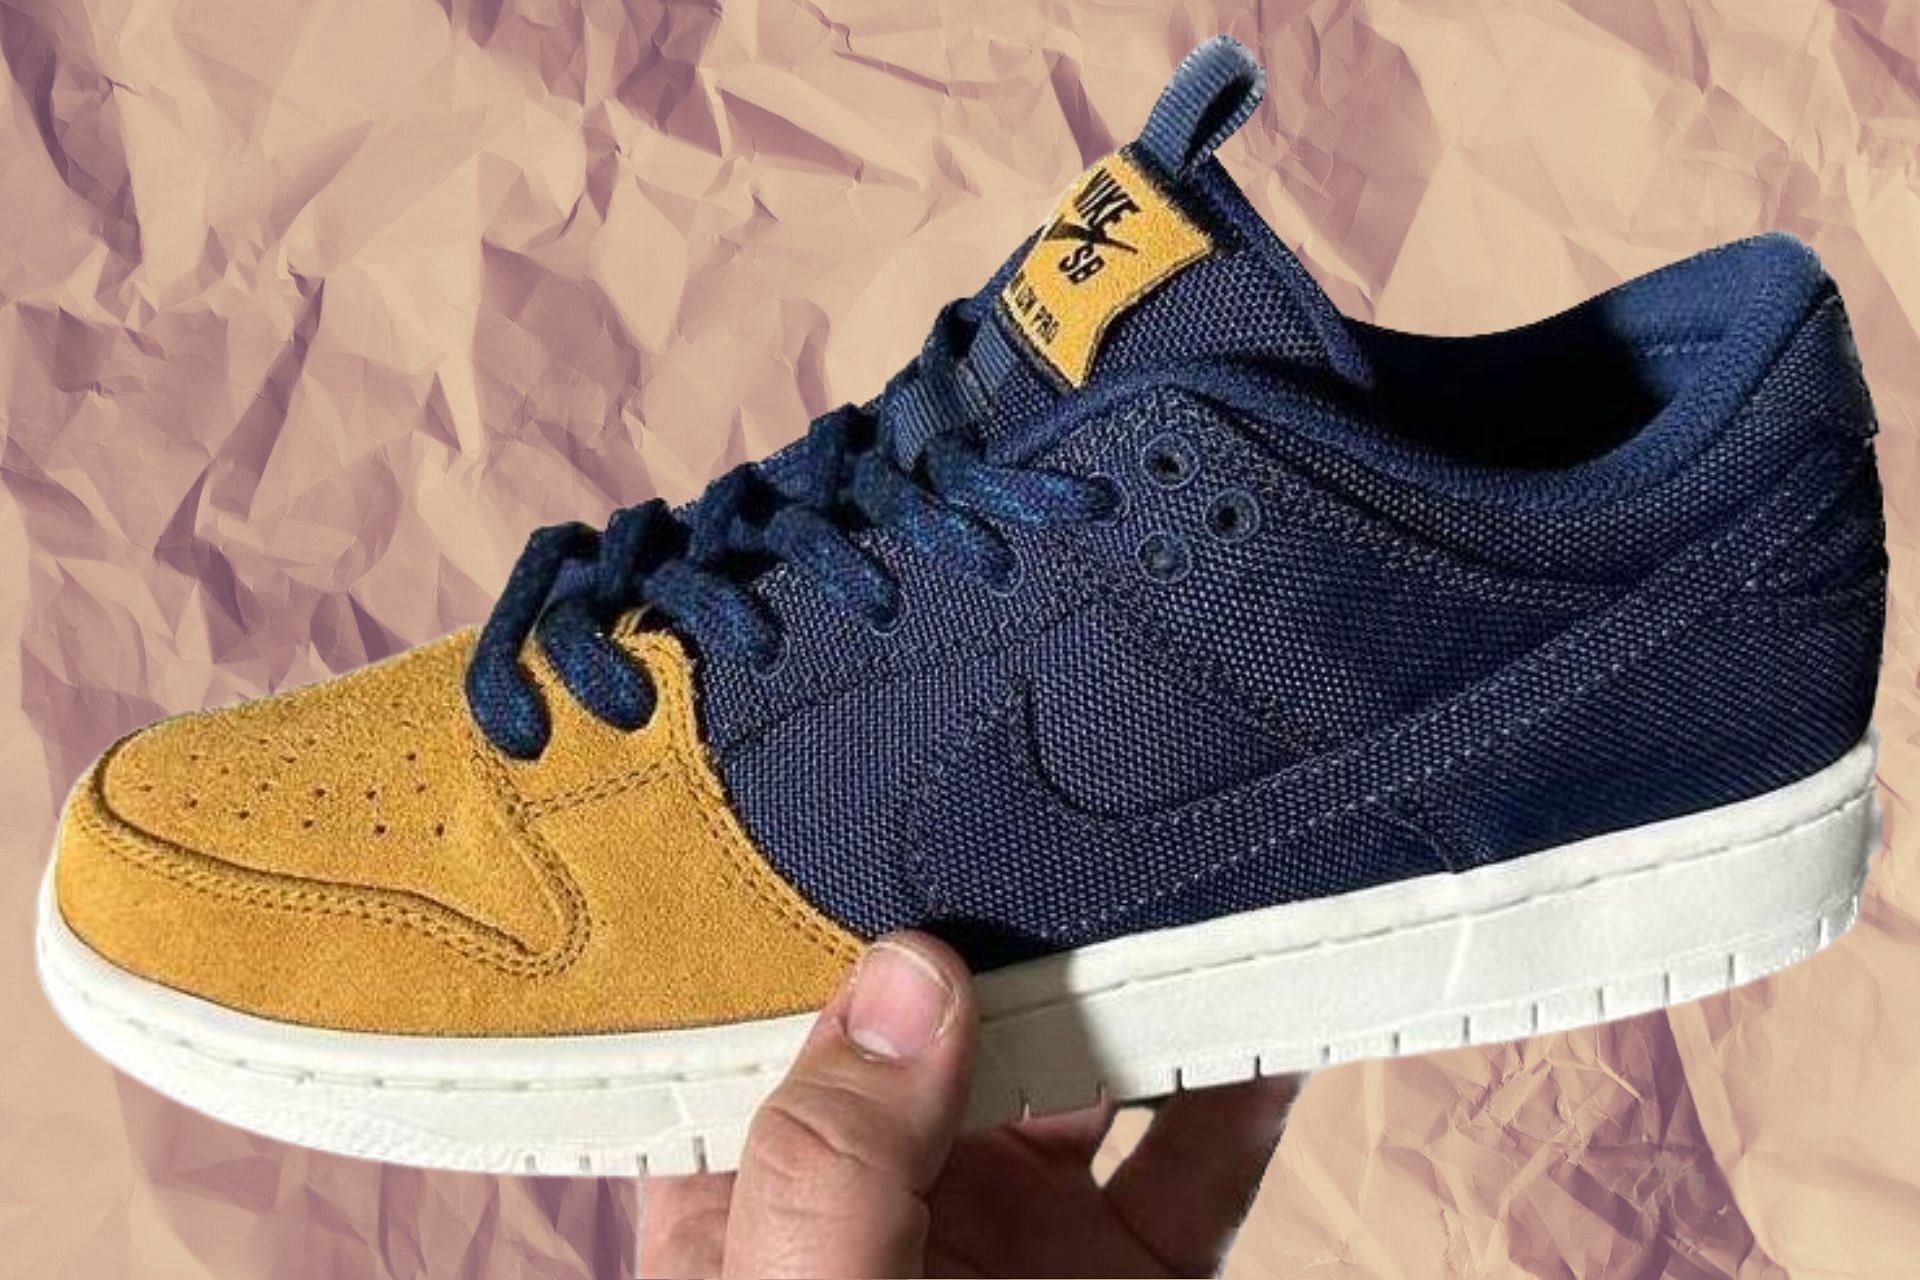 Nike Sb Dunk Low Pro Navy/Tan Shoes: Everything We Know So Far